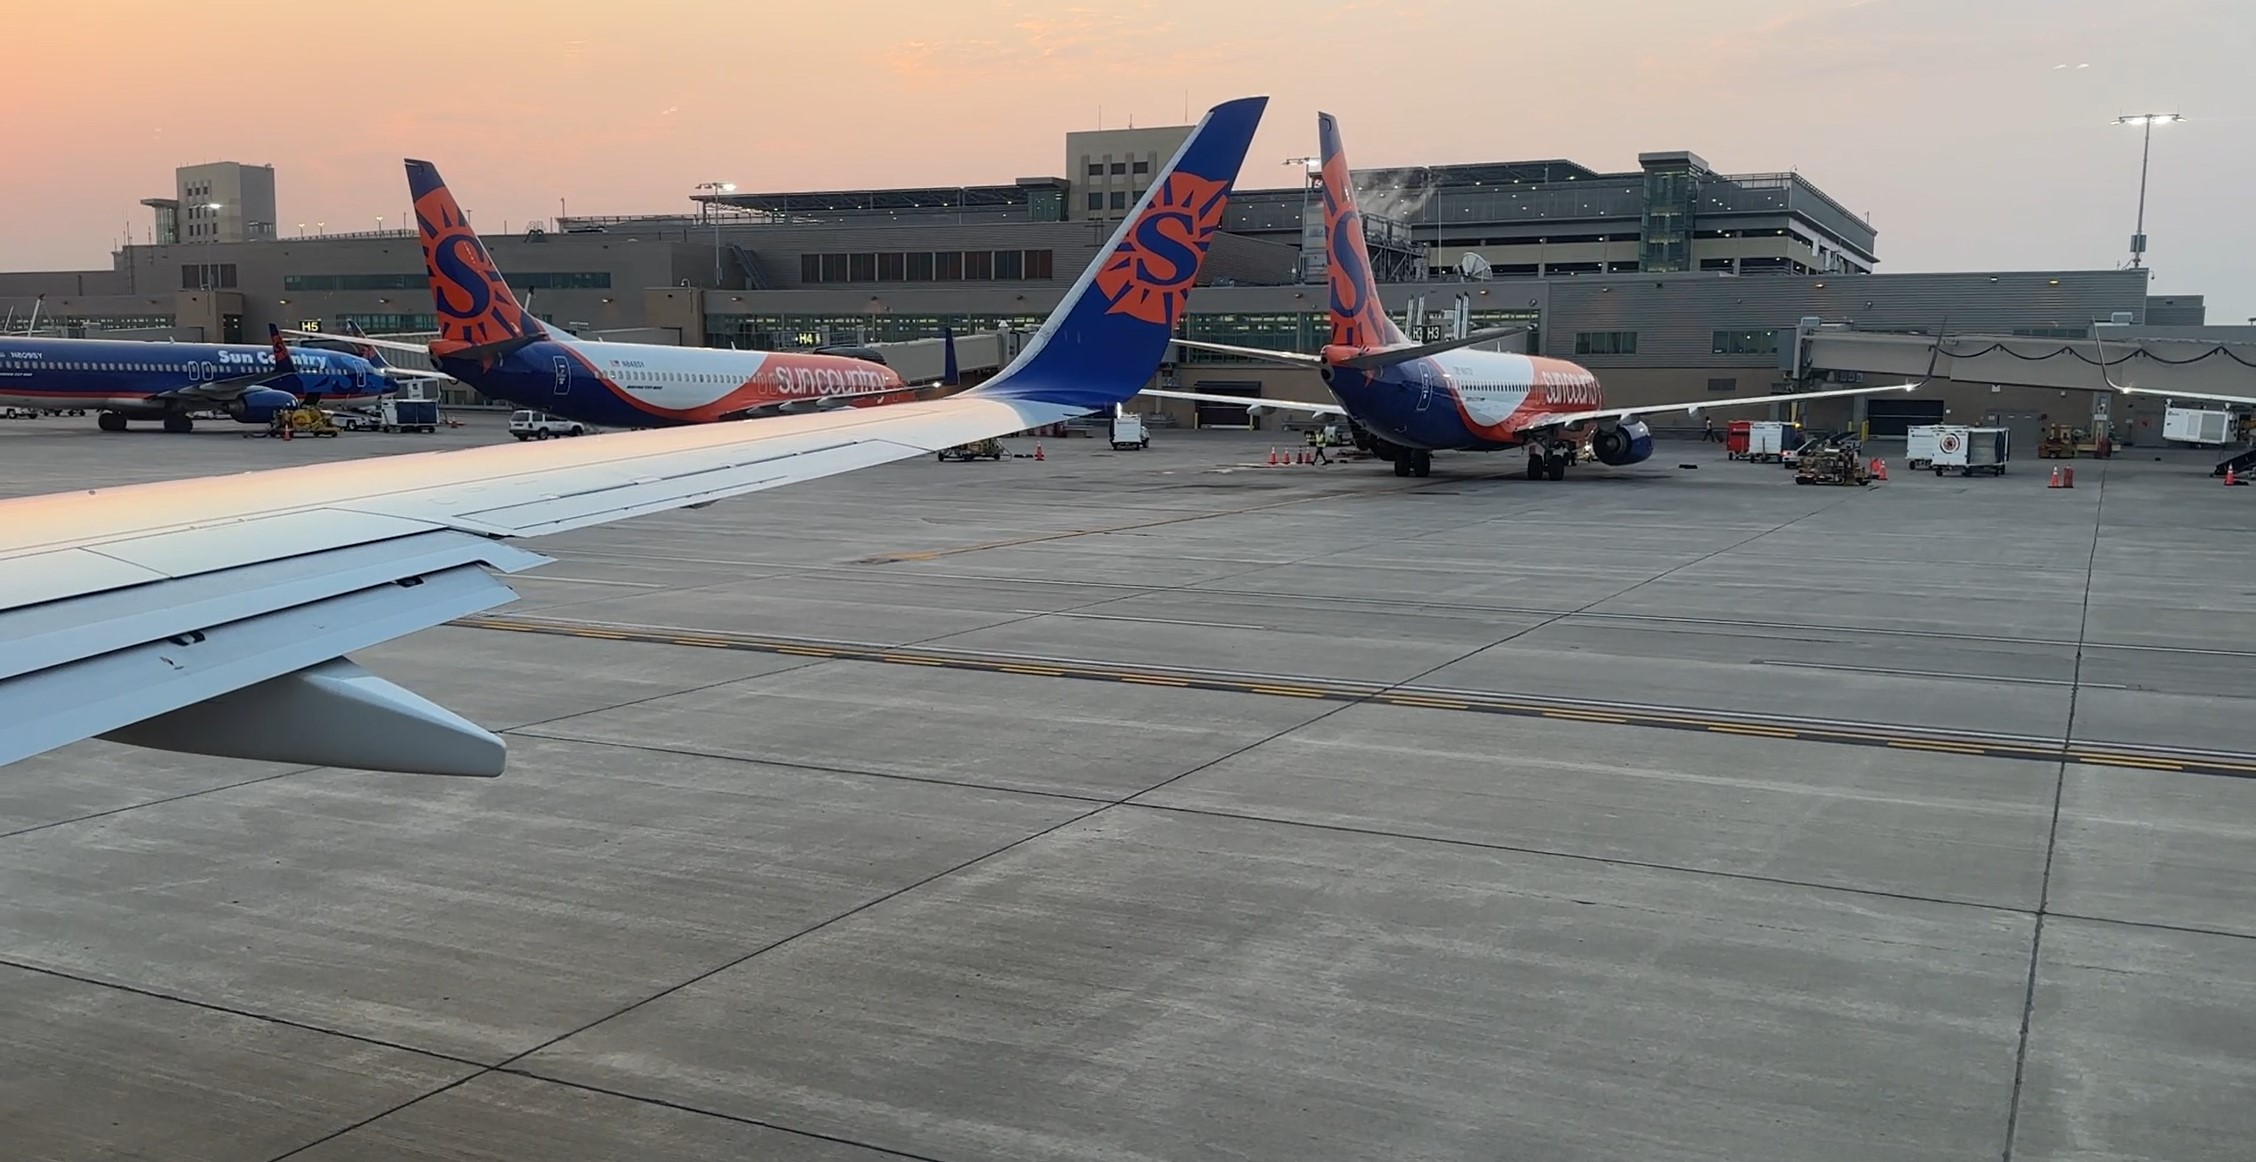 Review: Sun Country 737-800 Economy